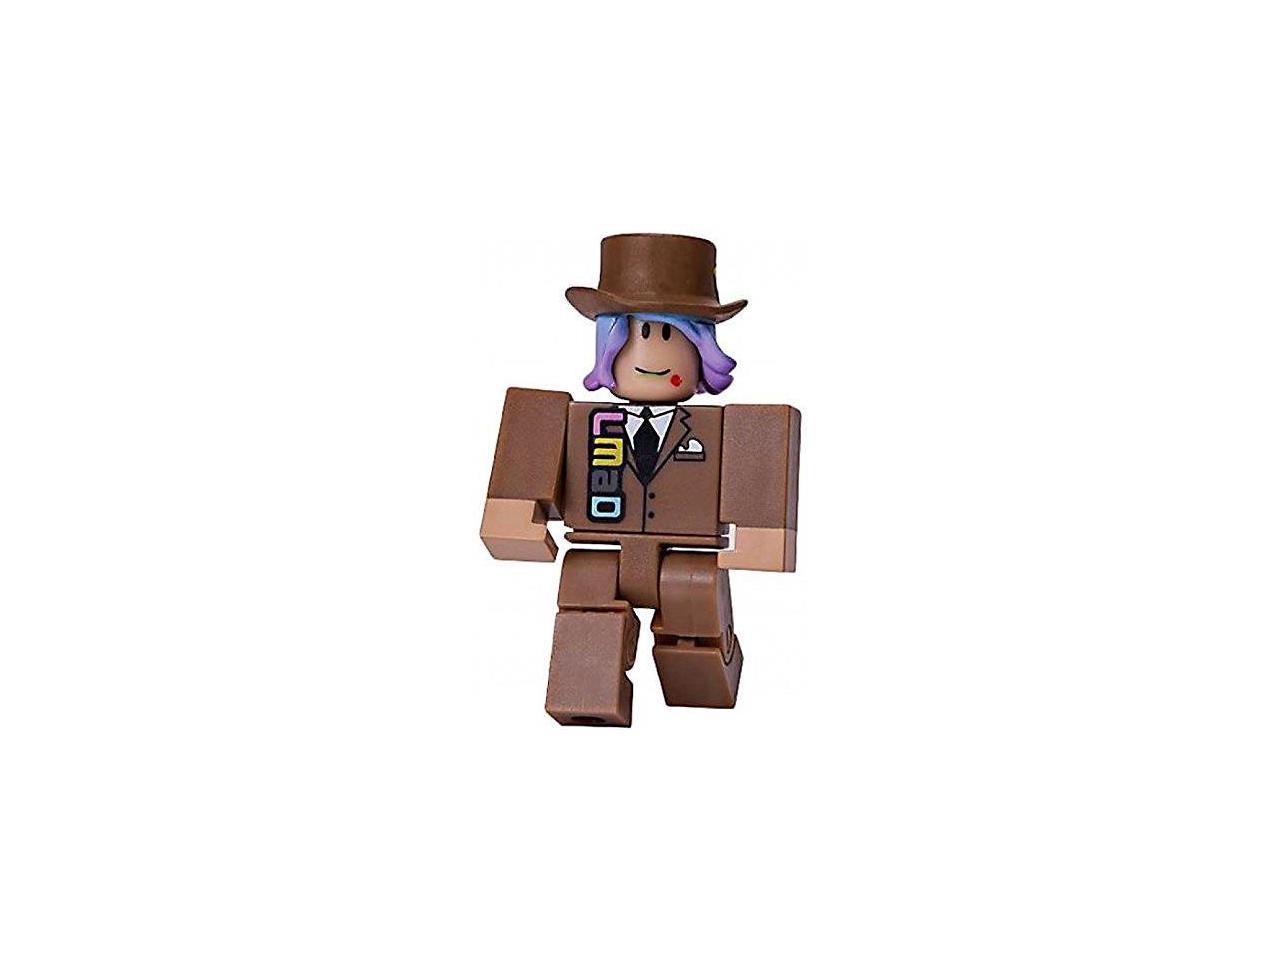 Roblox Series 1 Let S Make A Deal Action Figure Mystery Box Virtual Item Code 2 5 Newegg Com - lets make a deal roblox toy